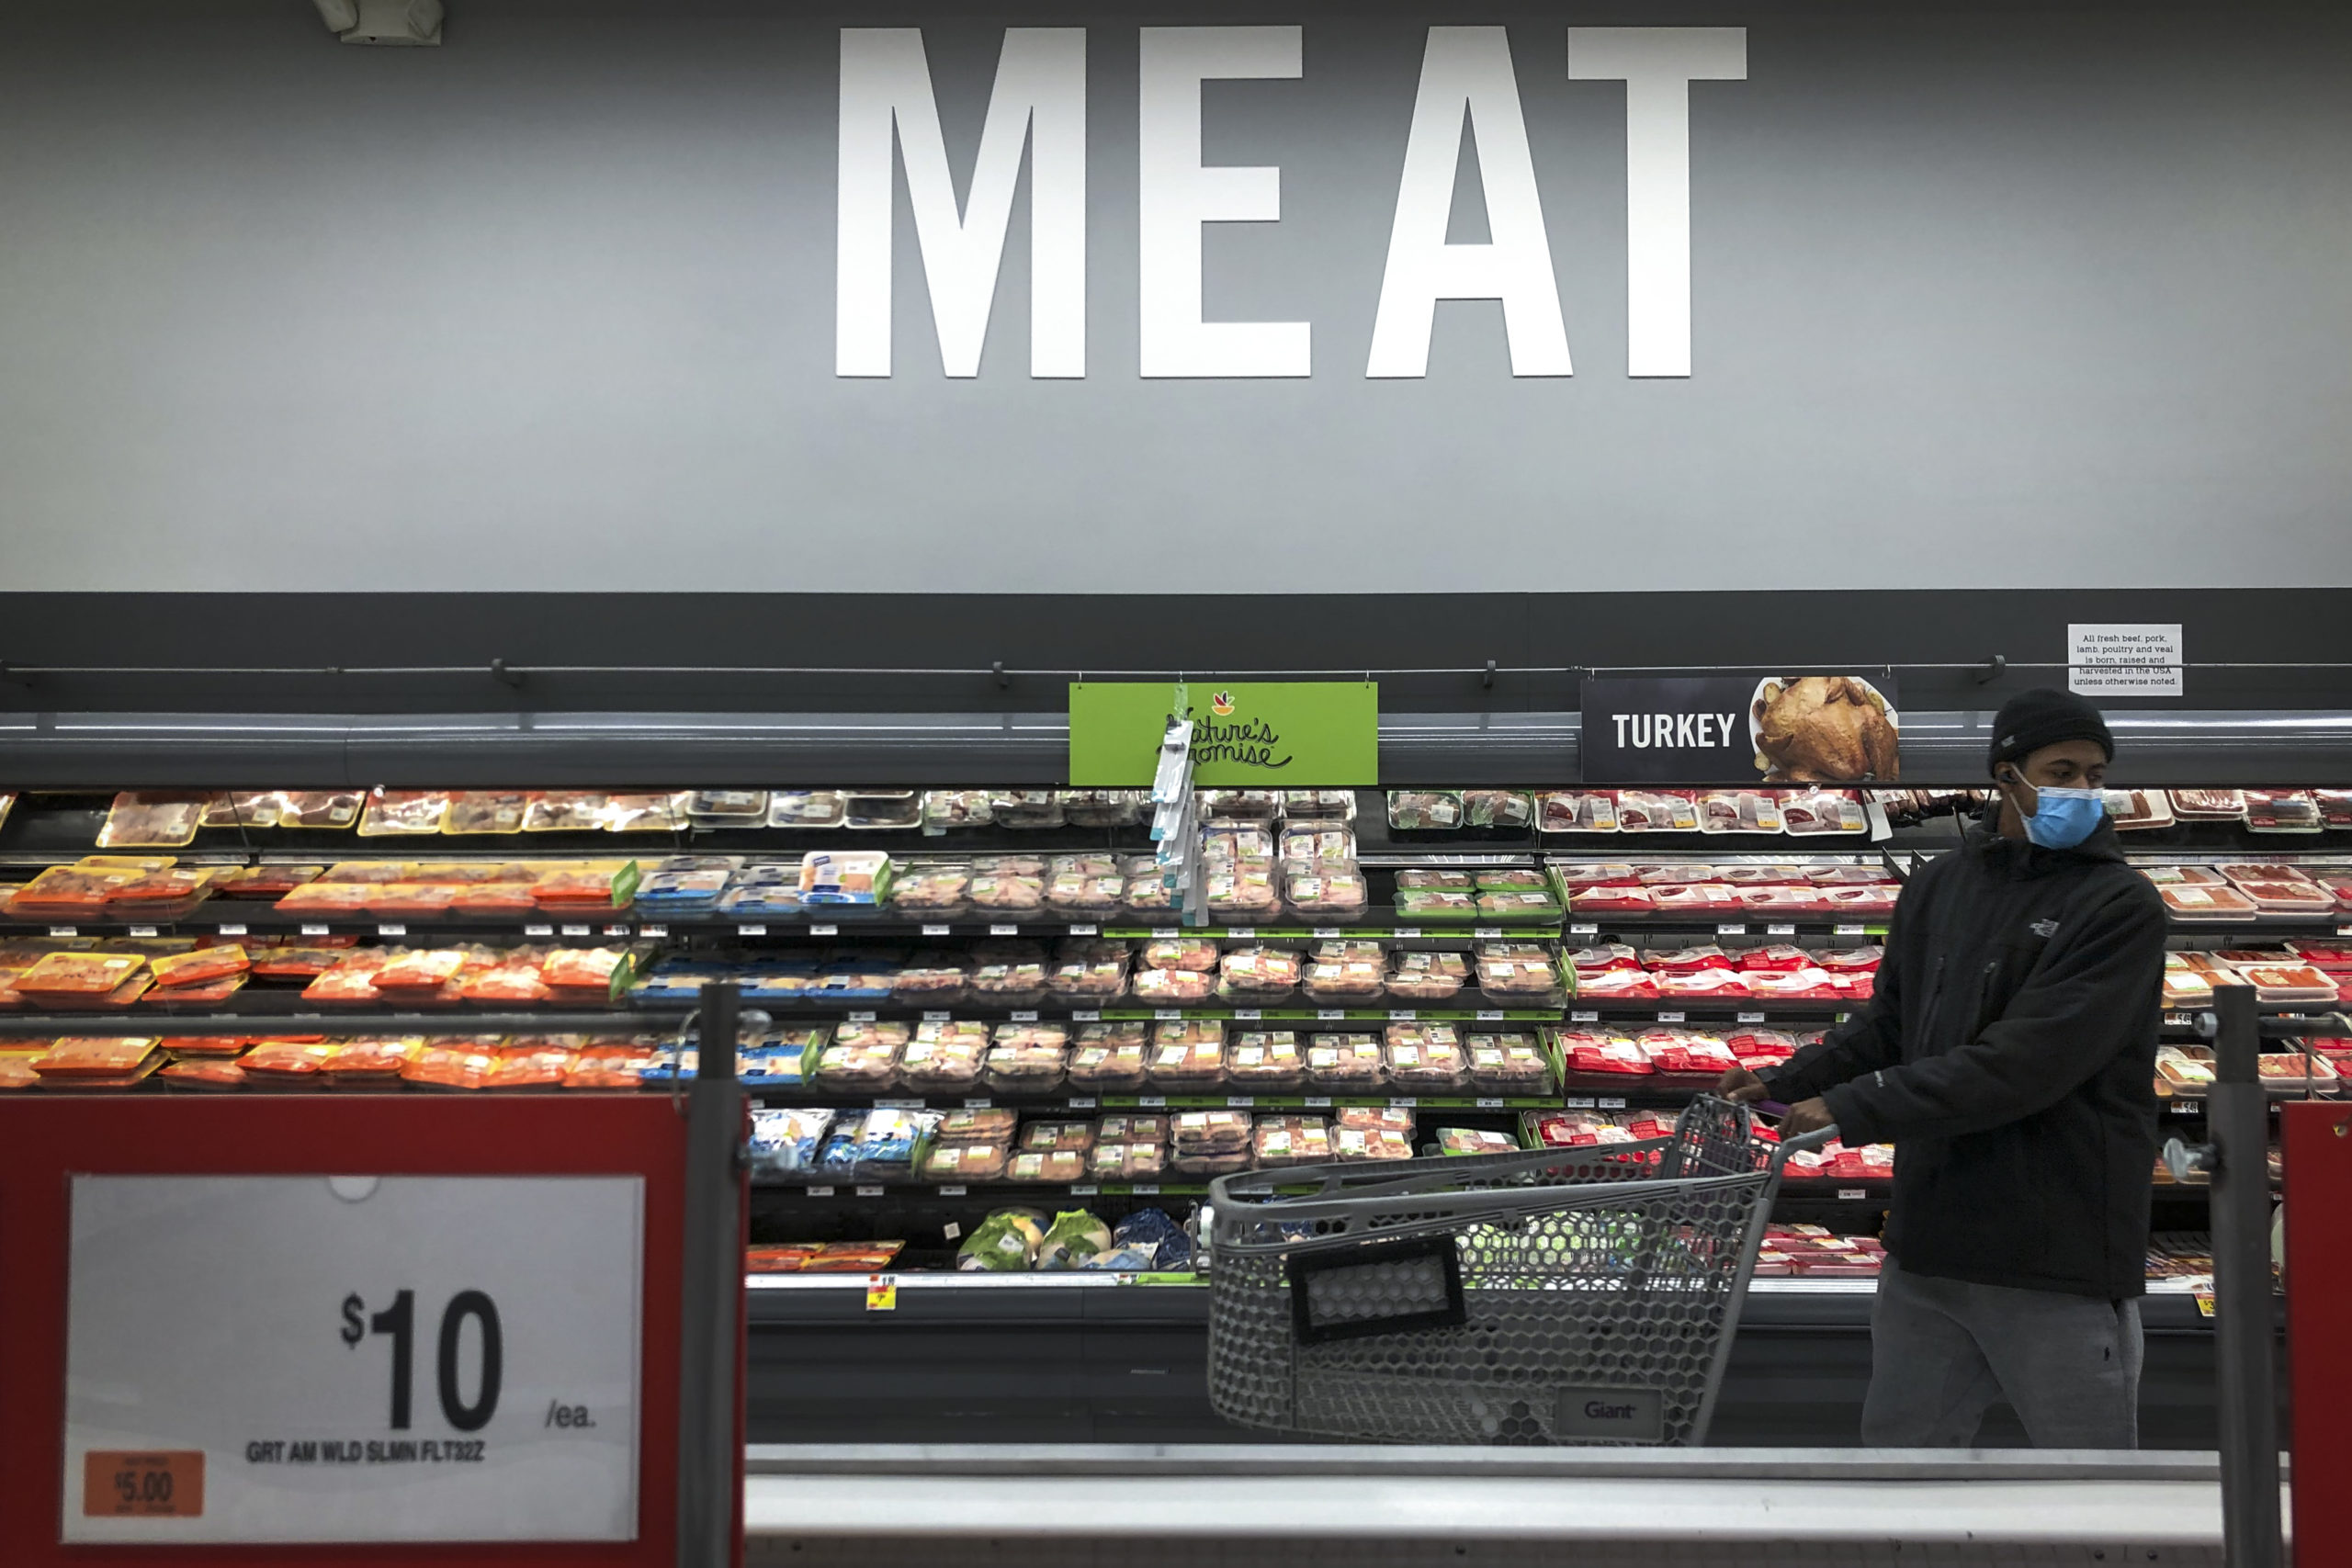 A man shops in the meat section at a grocery store in Washington, D.C. last year. (Drew Angerer/Getty Images)